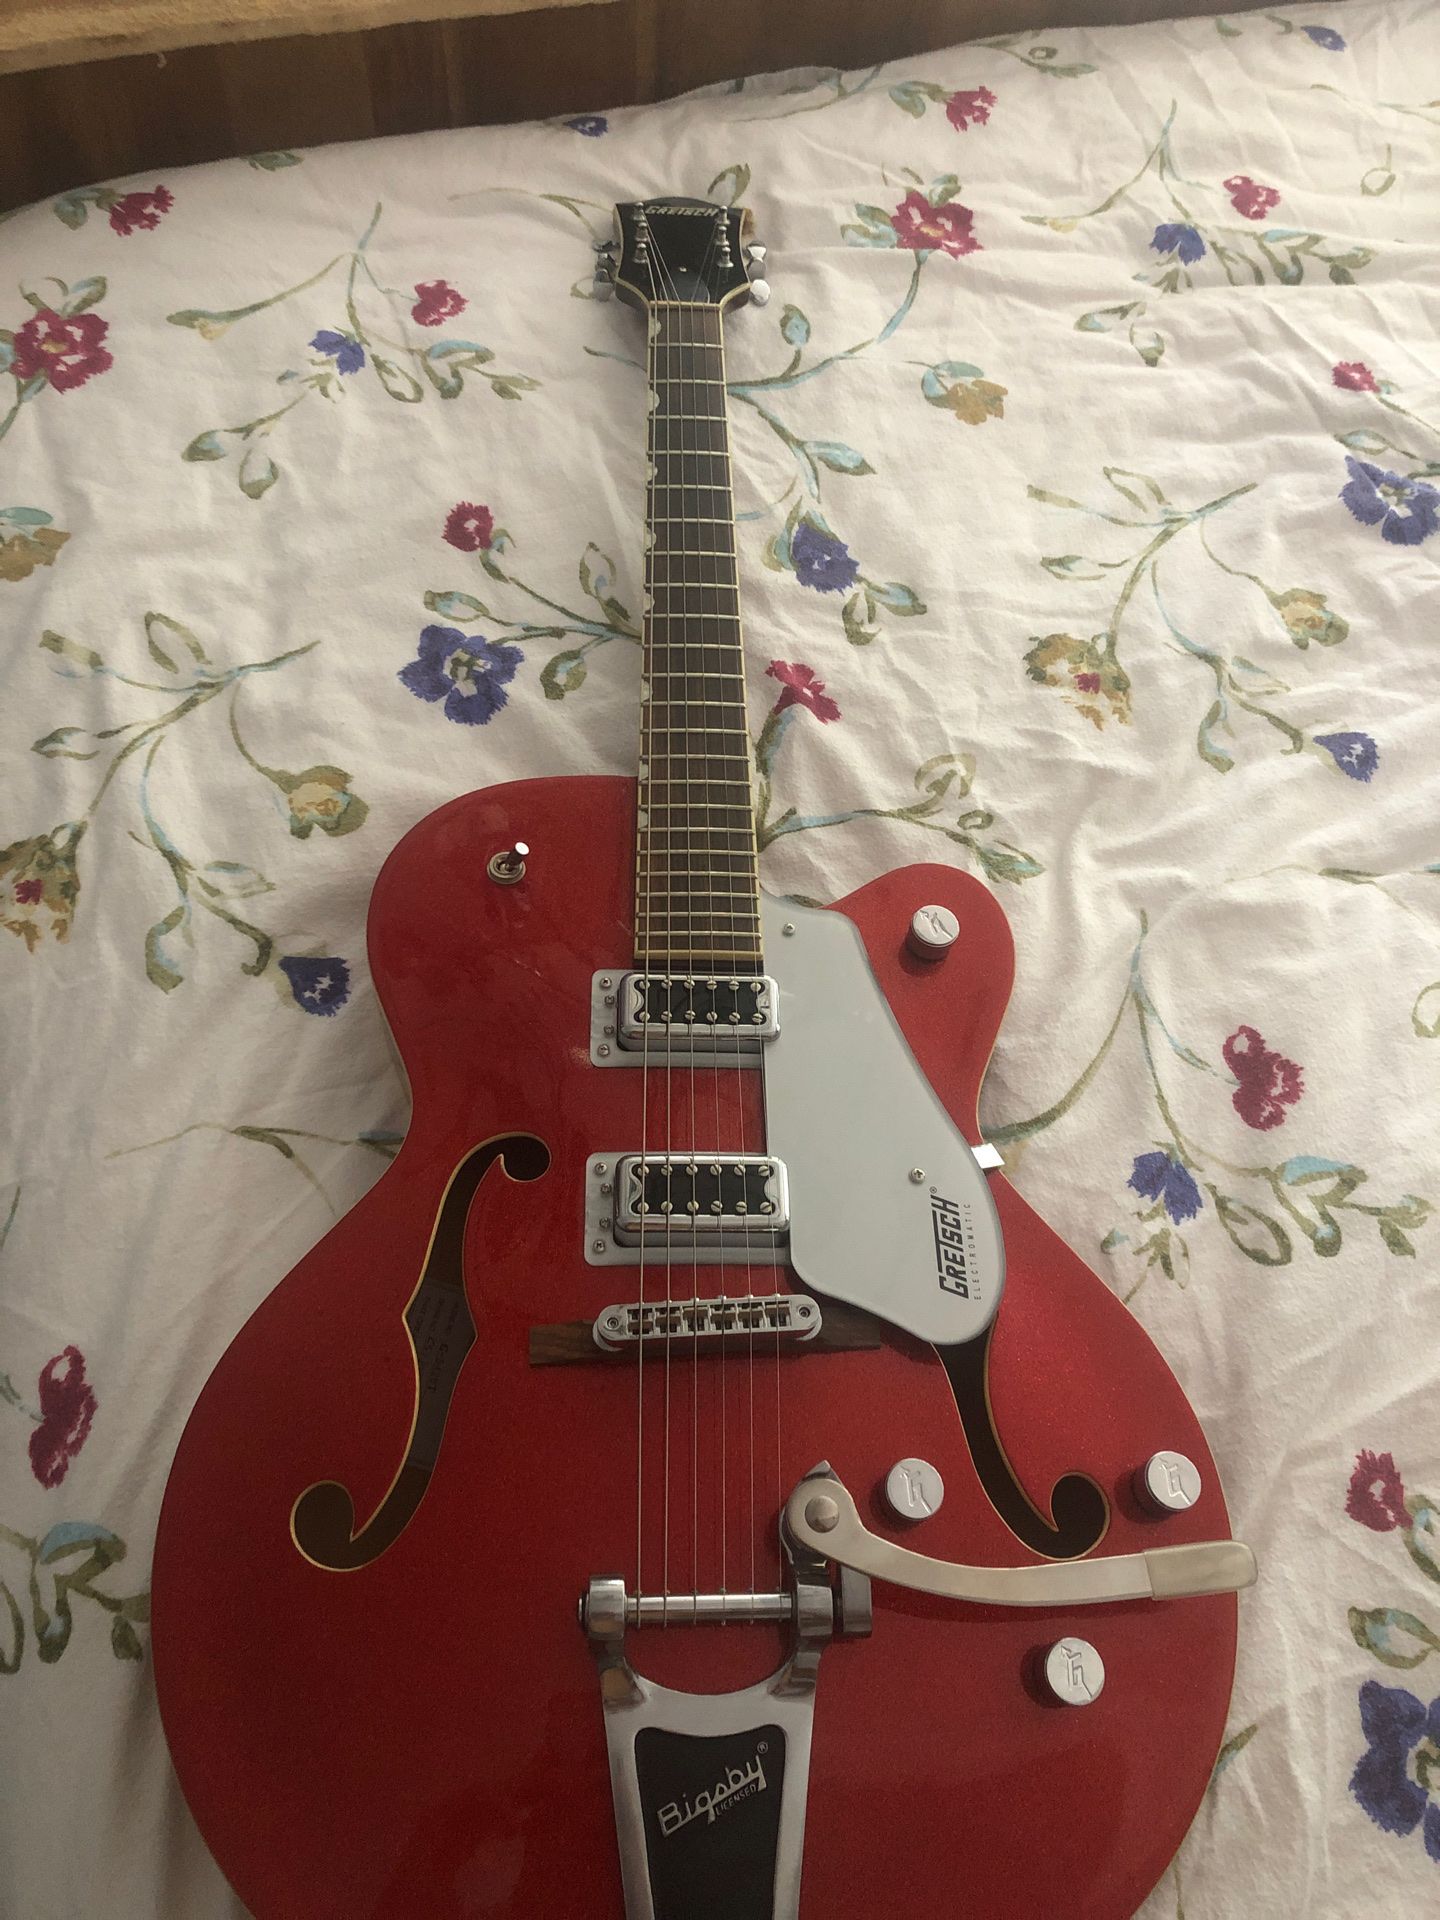 Gretsch Guitar G-5420T brand new only played about 10 times